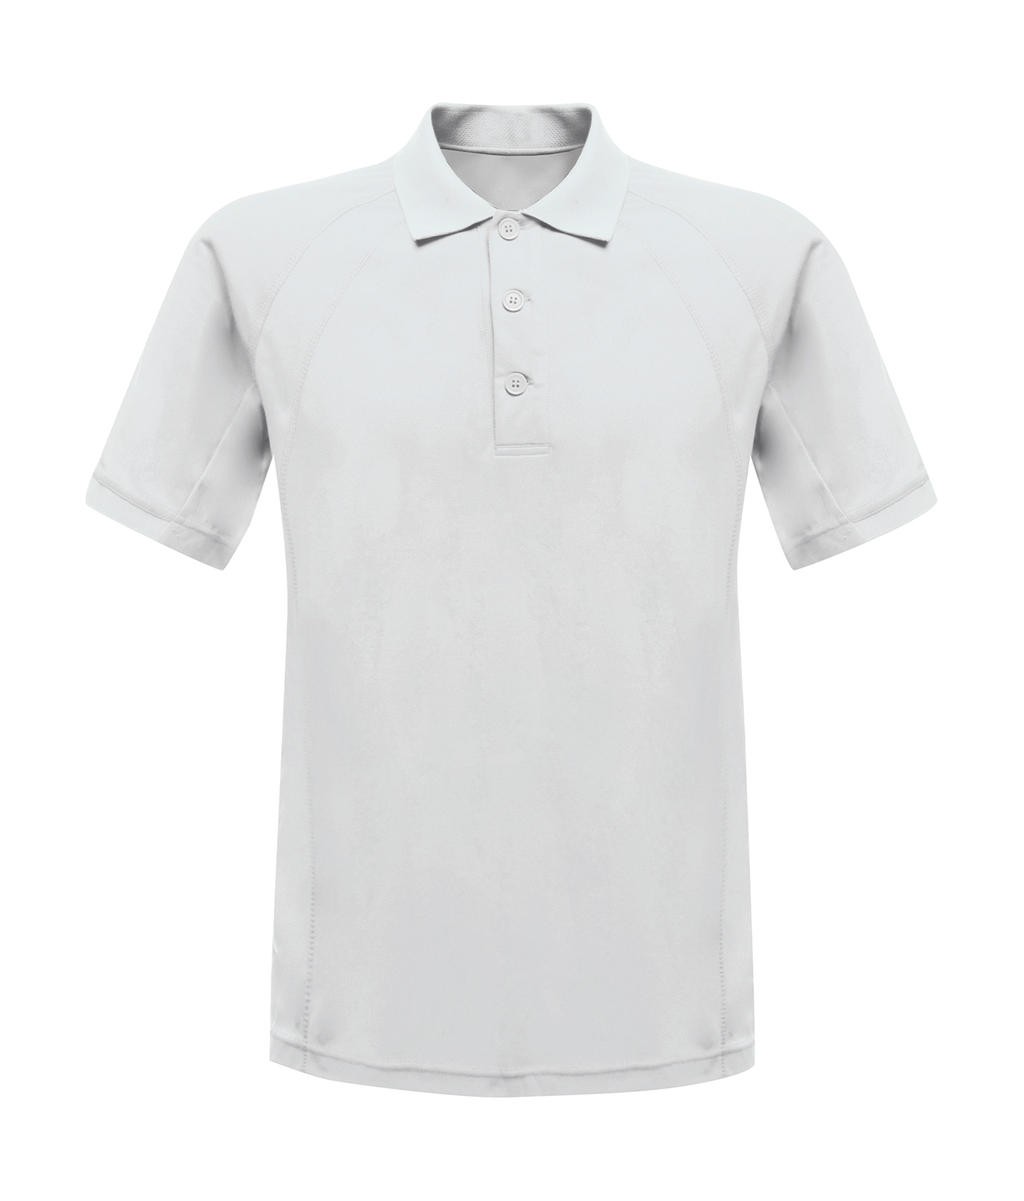 Regatta Coolweave Wicking Polo TRS147